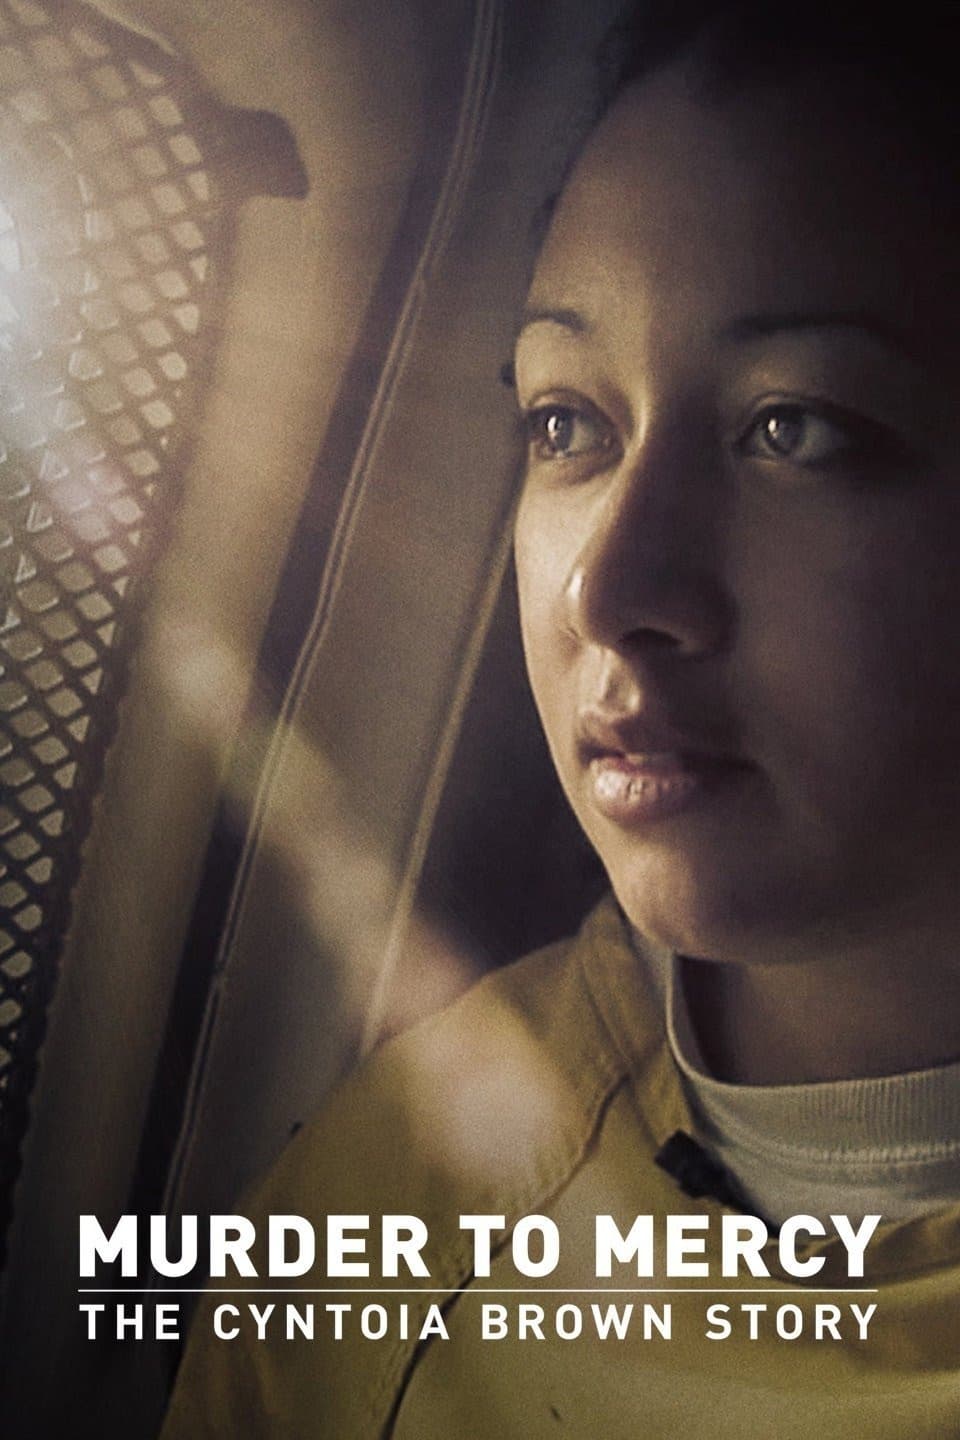 Murder to Mercy - The Cyntoia Brown Story (2020)